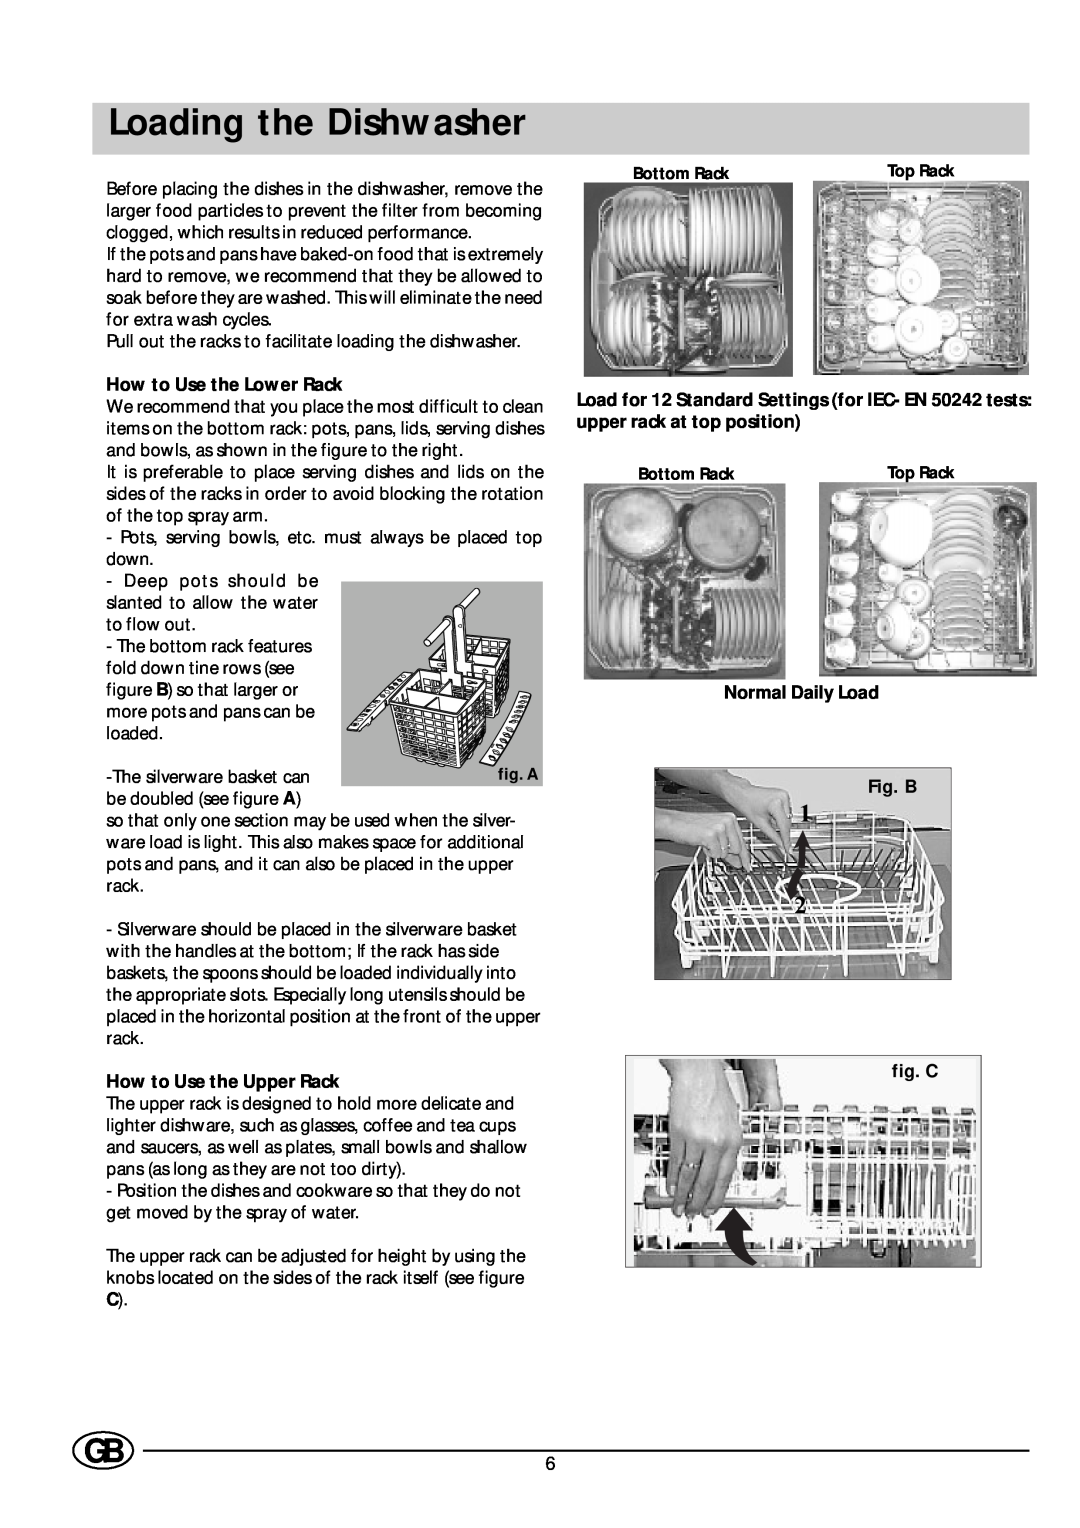 Indesit DE 73 manual Loading the Dishwasher, How to Use the Lower Rack, How to Use the Upper Rack, Normal Daily Load Fig. B 